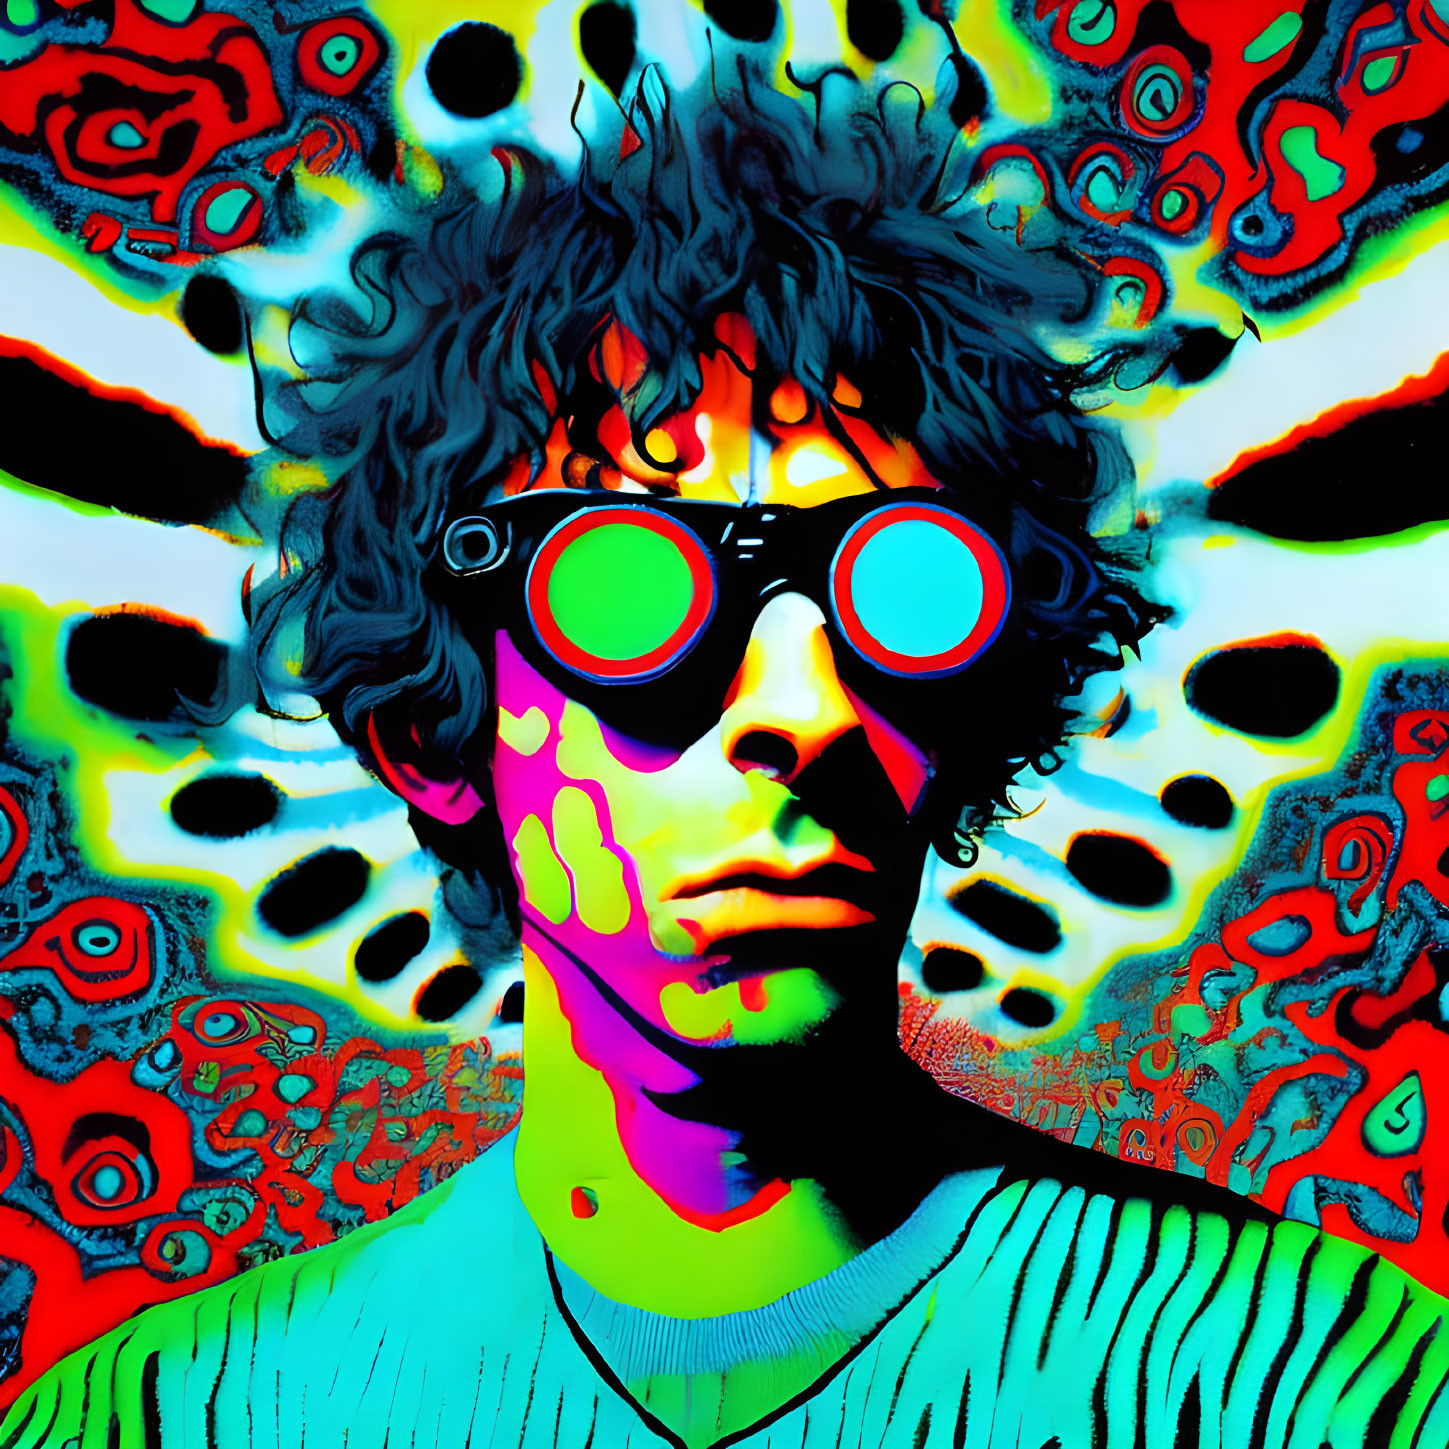 Curly-Haired Person in Red Sunglasses on Psychedelic Background